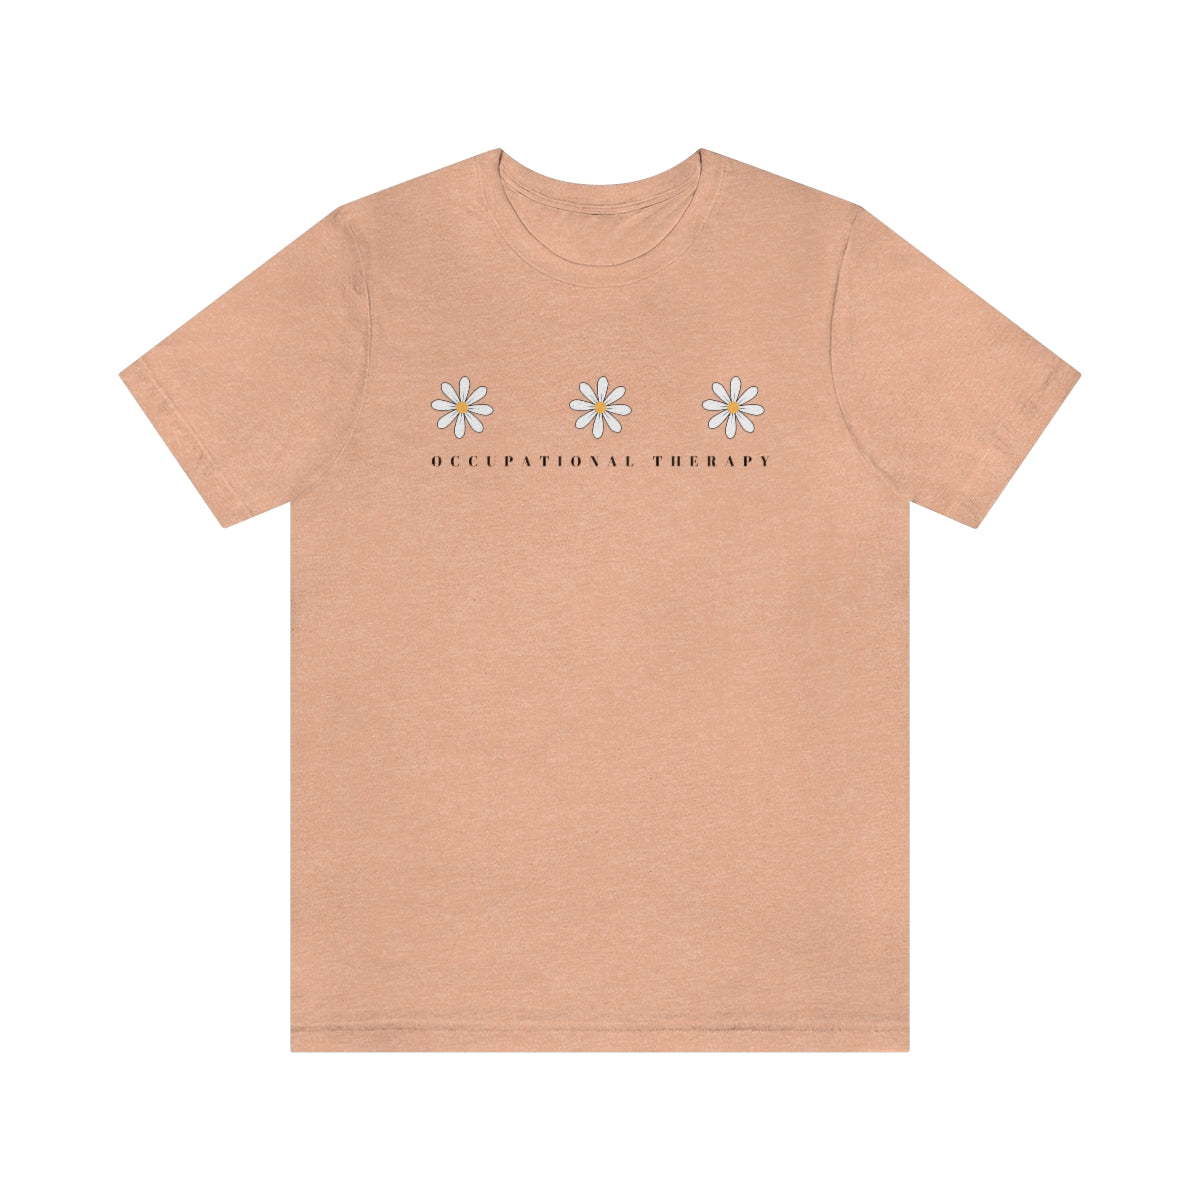 Daisy Occupational Therapy Jersey T-Shirt